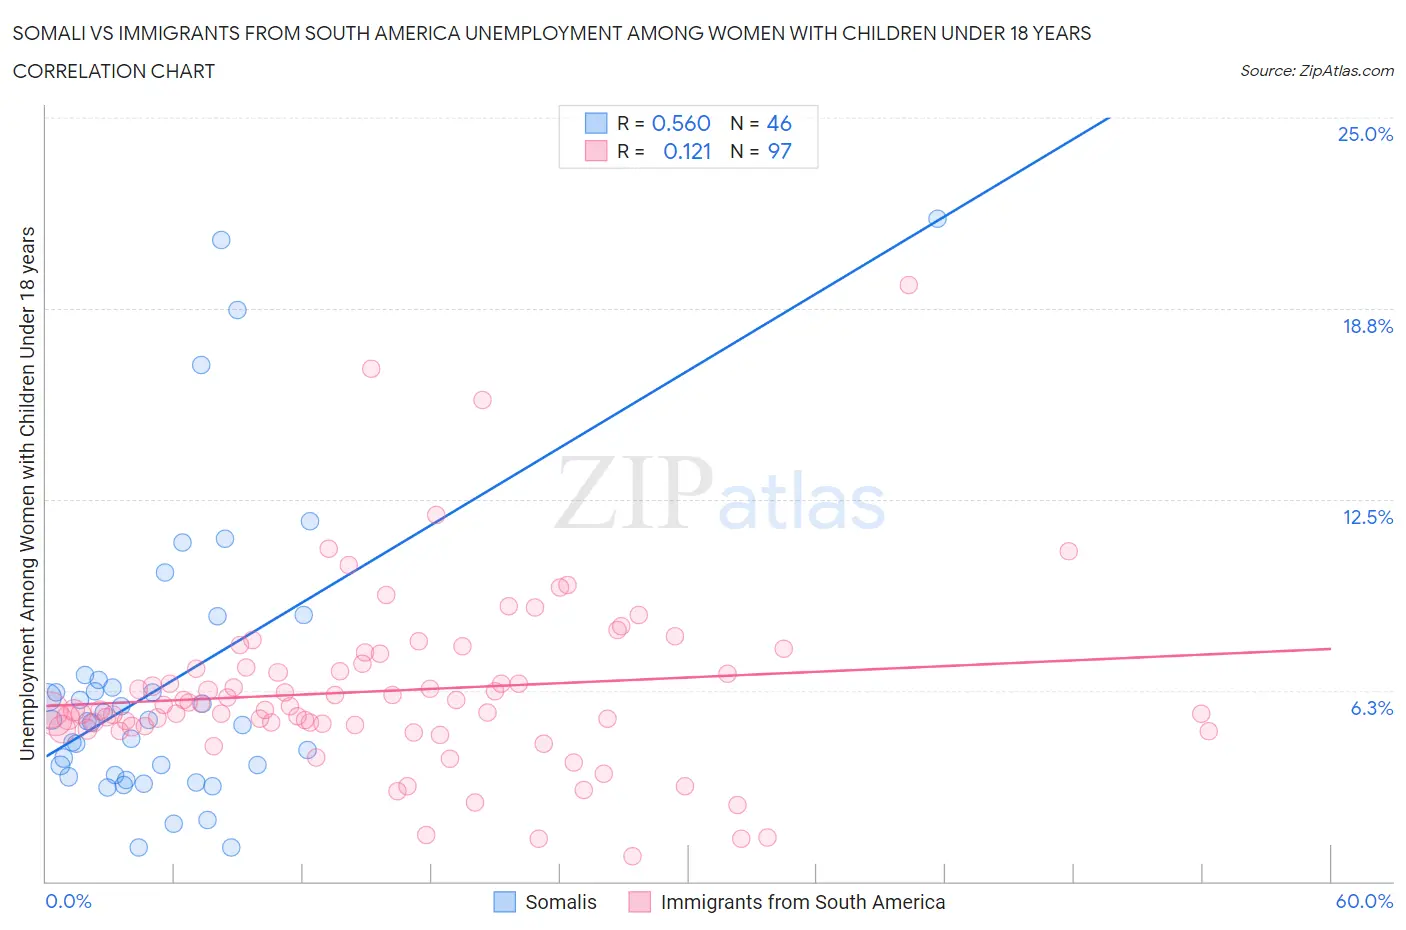 Somali vs Immigrants from South America Unemployment Among Women with Children Under 18 years